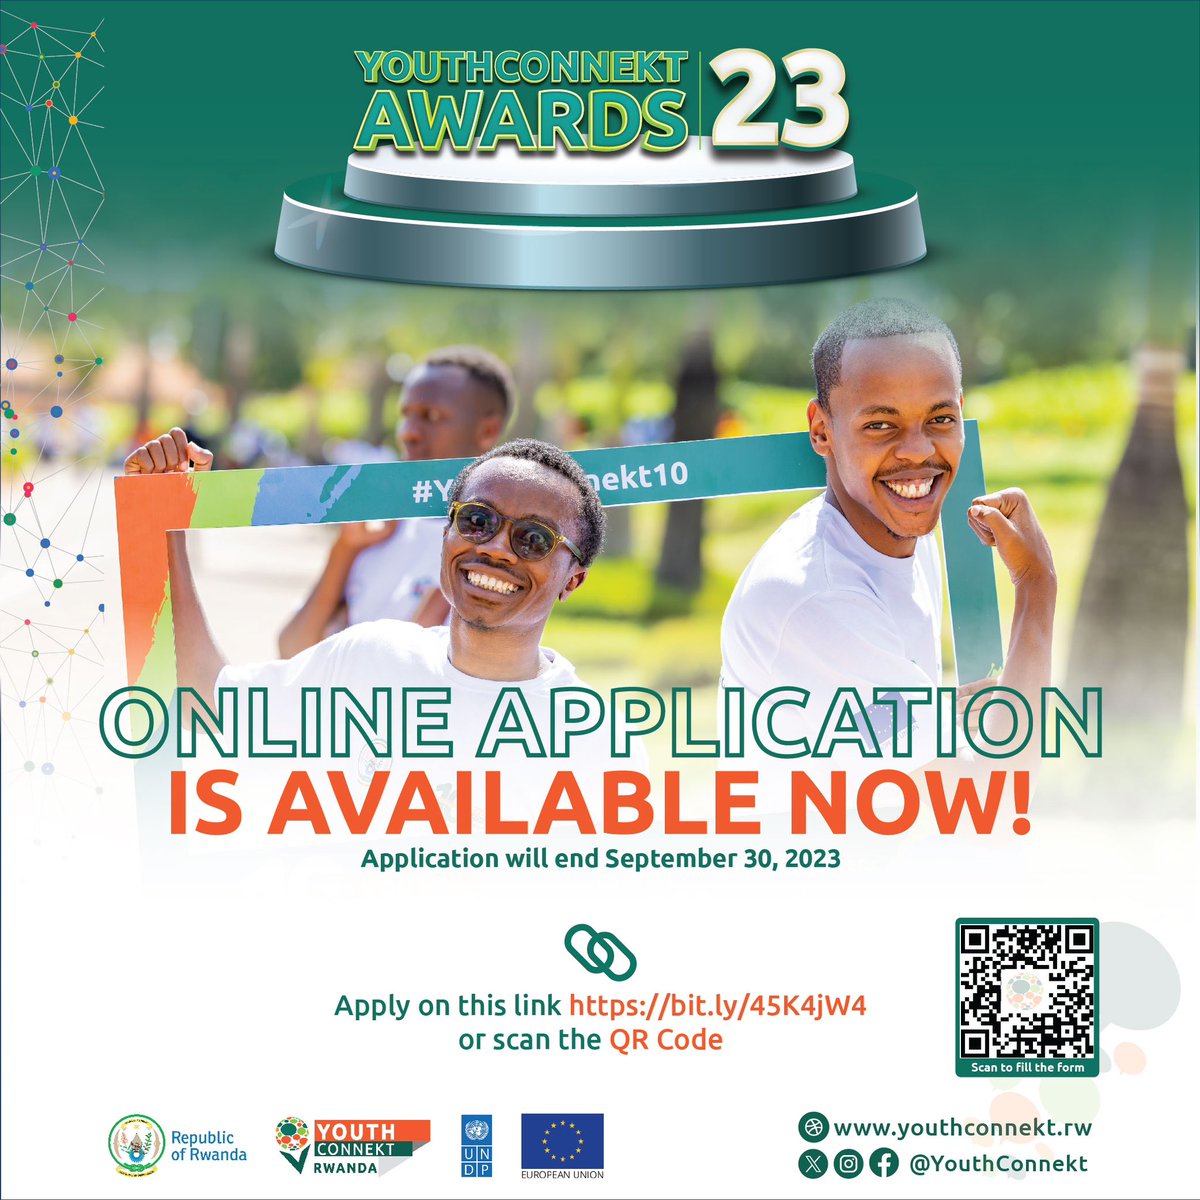 🚨Good news! The online application is open to all eligible young Rwandan entrepreneurs. Apply via this link: bit.ly/45K4jW4 or scan the QR code on the artwork! #YCA2023 #RwandaYouth